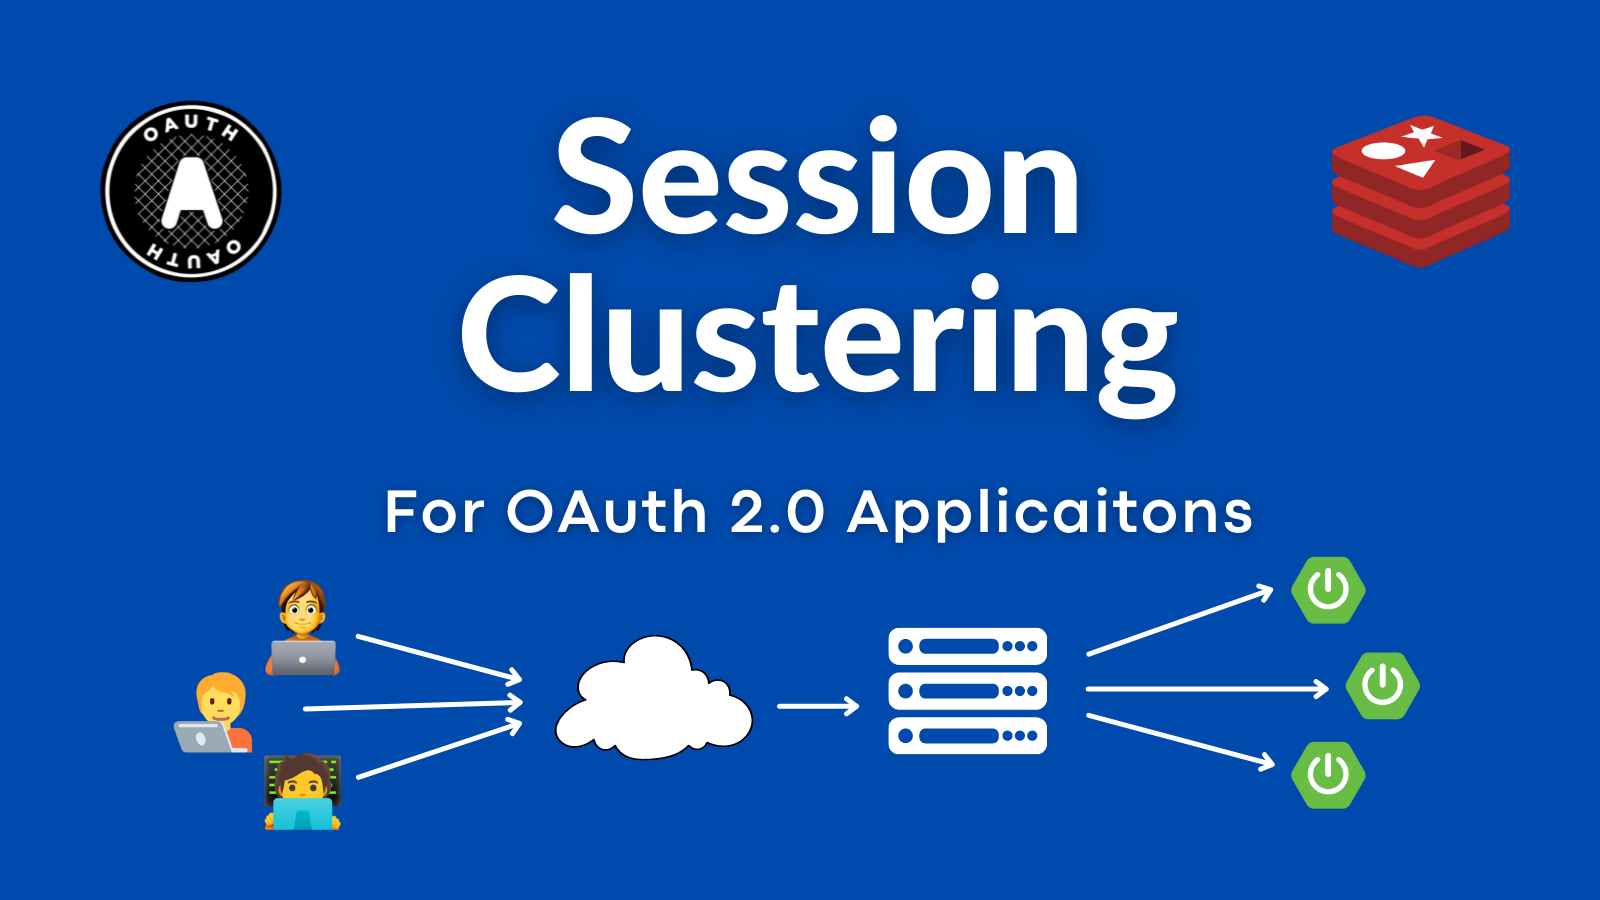 Session Clustering for OAuth 2.0 Applications